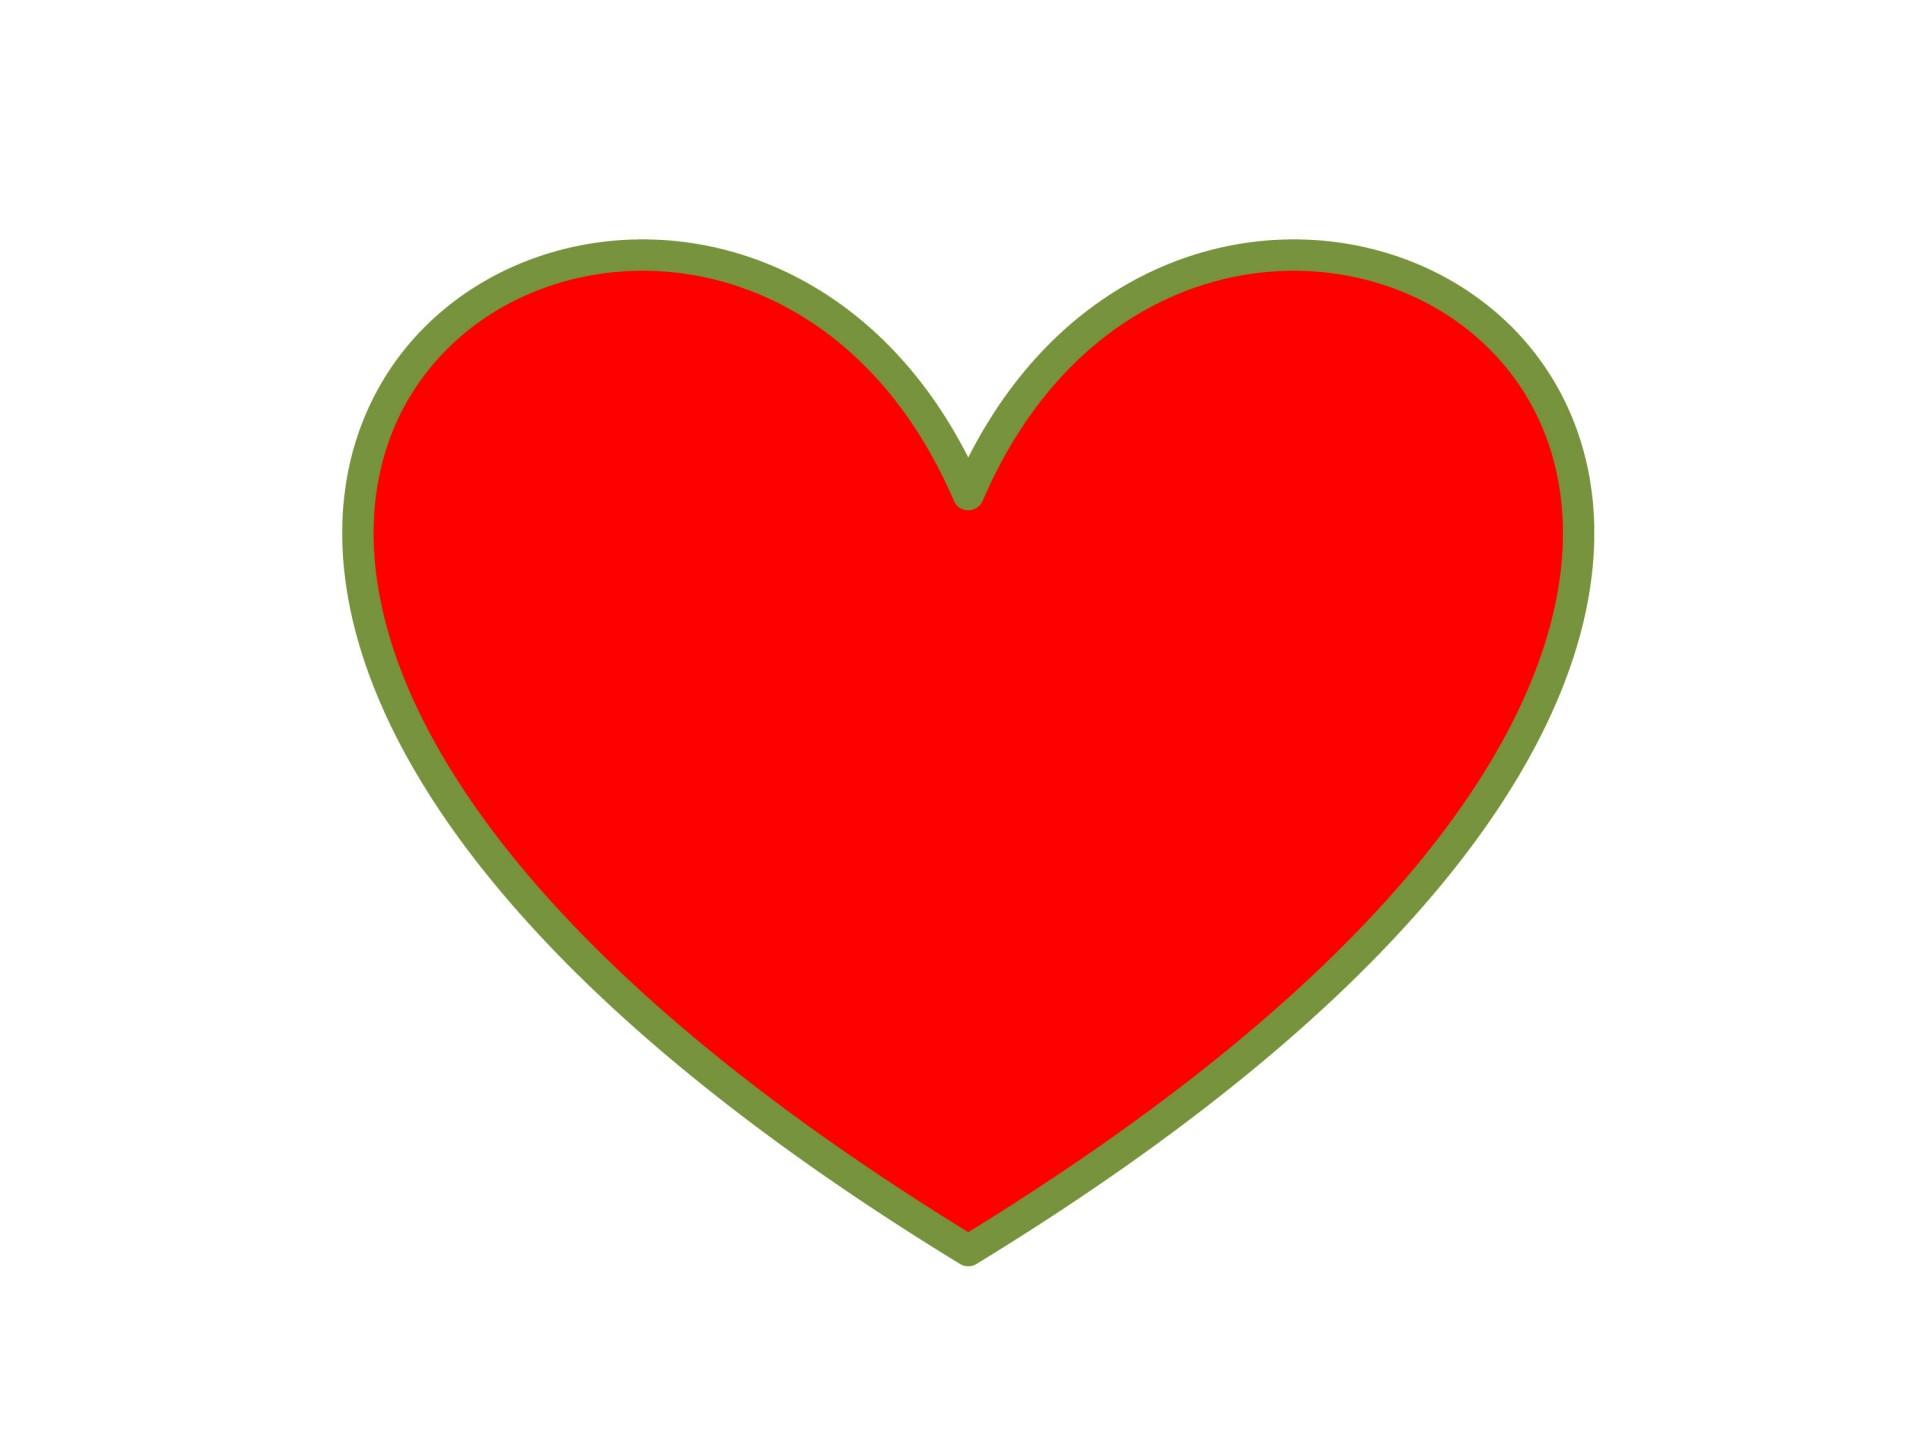 Christmas heart red green background Free Image From Needpix